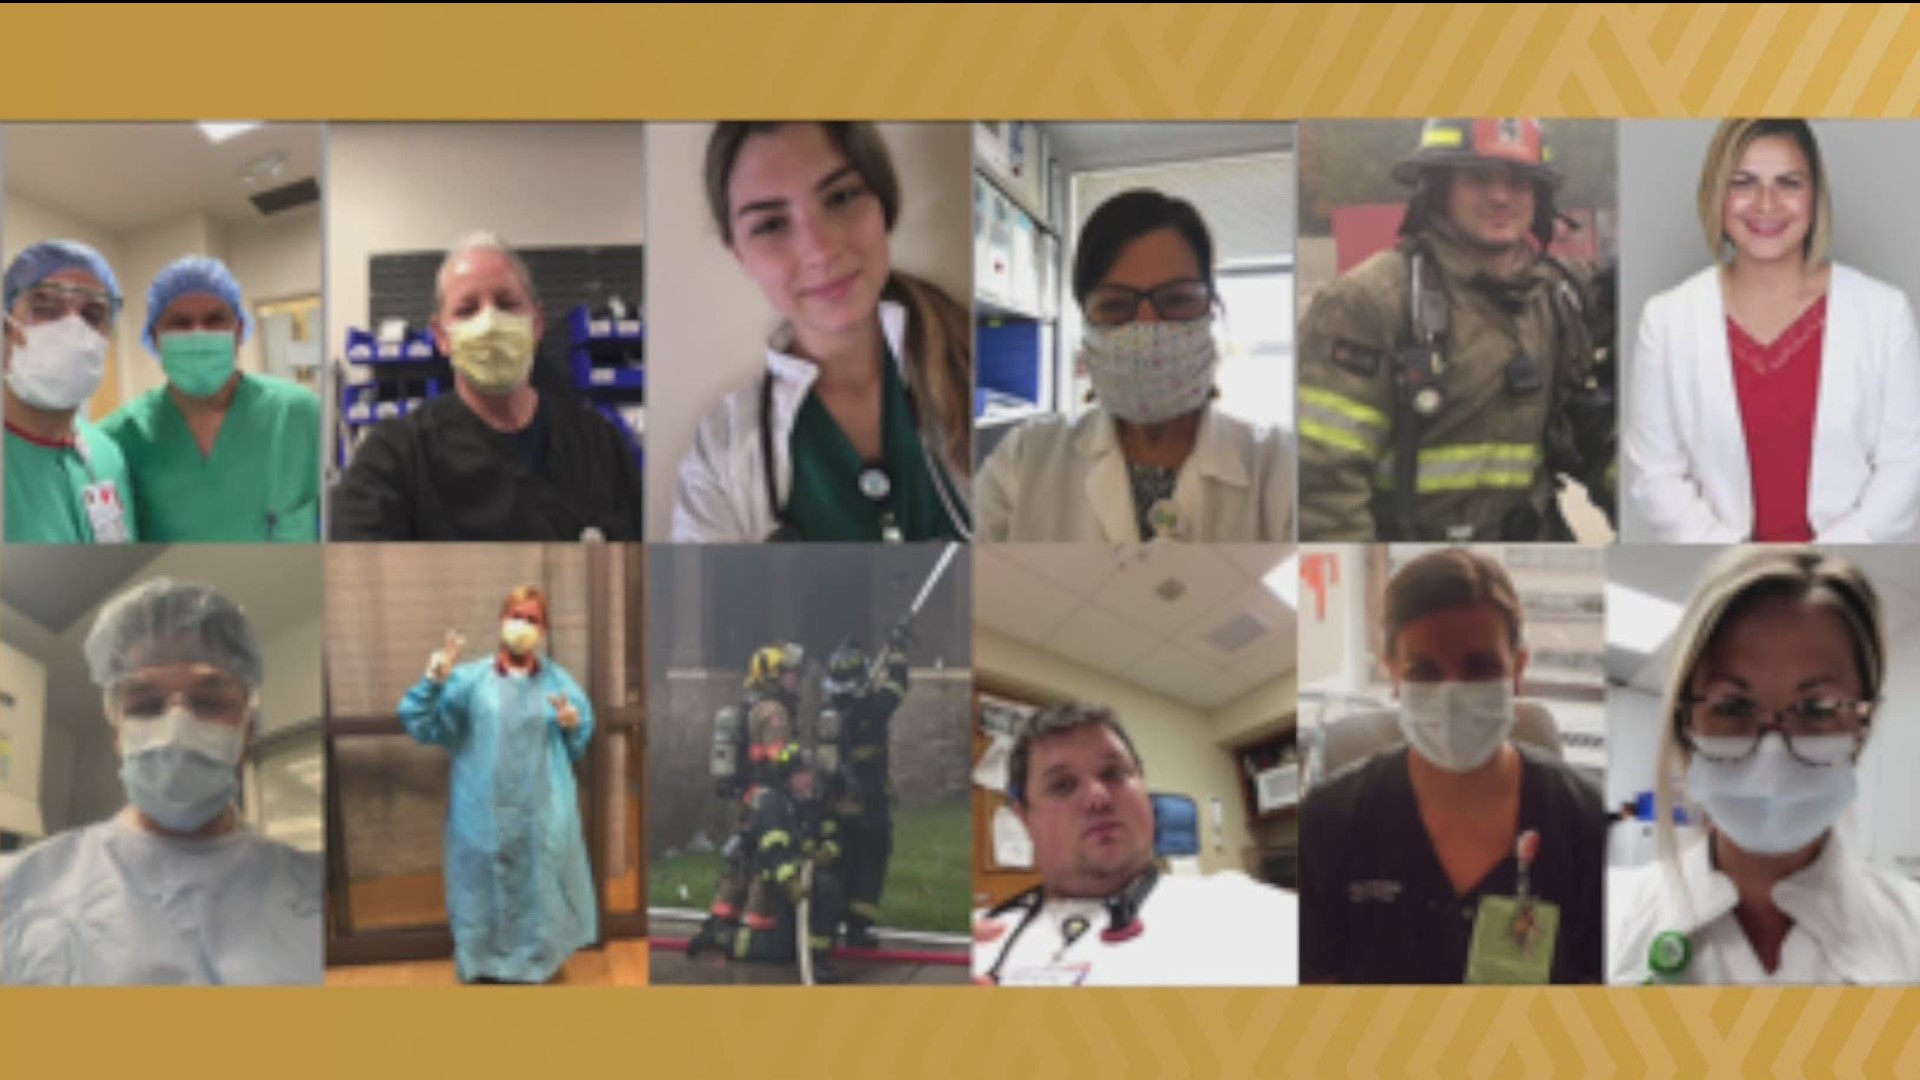 The Longville family includes five nurses, two occupational therapists, a respiratory therapist, two firefighters, an anesthesiologist, and a pharmacist.